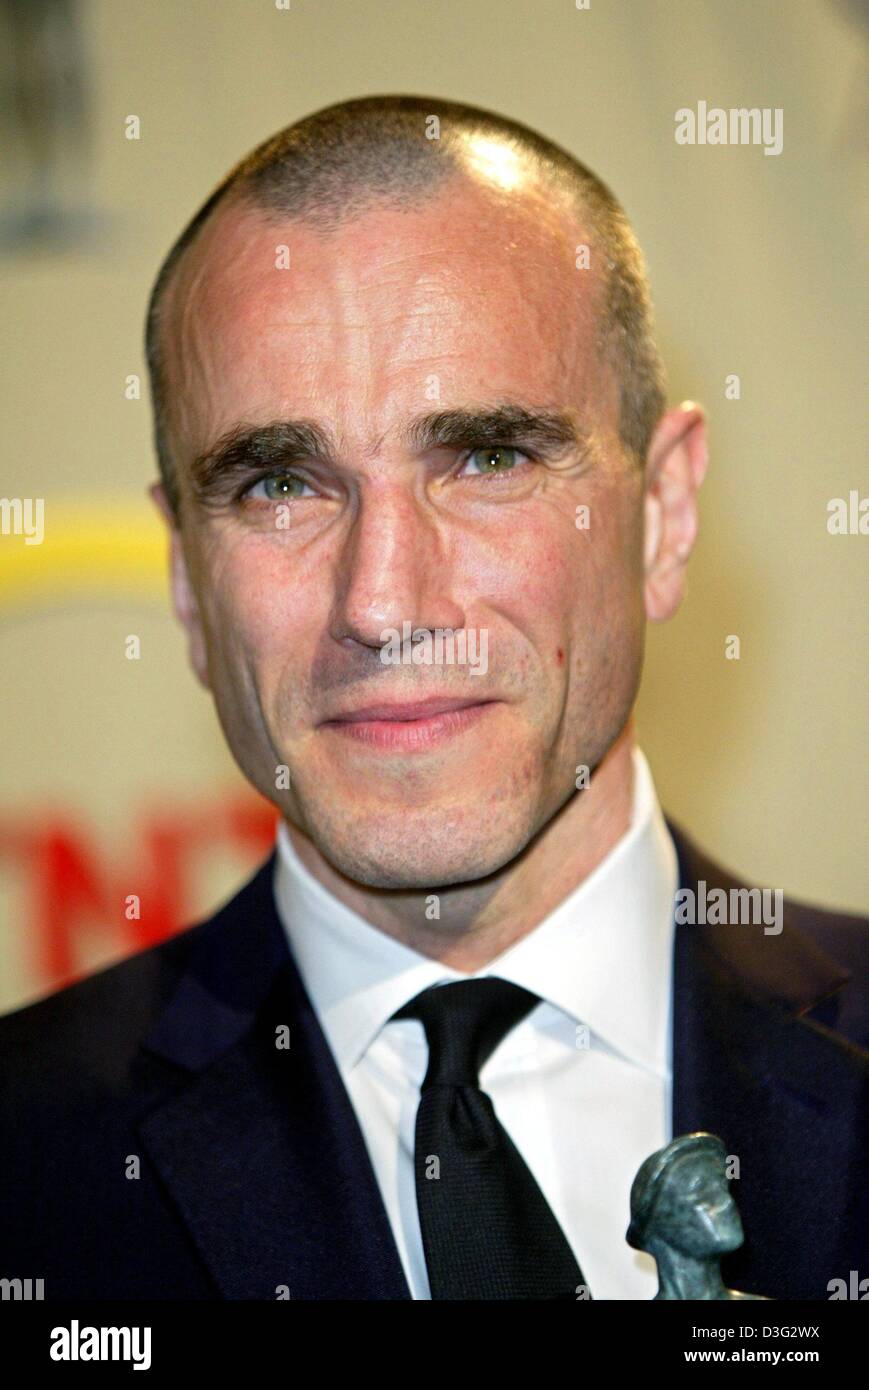 (dpa) - British actor Daniel Day-Lewis smiles after winning an award at the Screen Actors Guild (SAG) Awards in Los Angeles, 9 March 2003. He won the award in the category Outstanding Performance by a Male Actor in a Leading Role for 'Gangs of New York'. Stock Photo